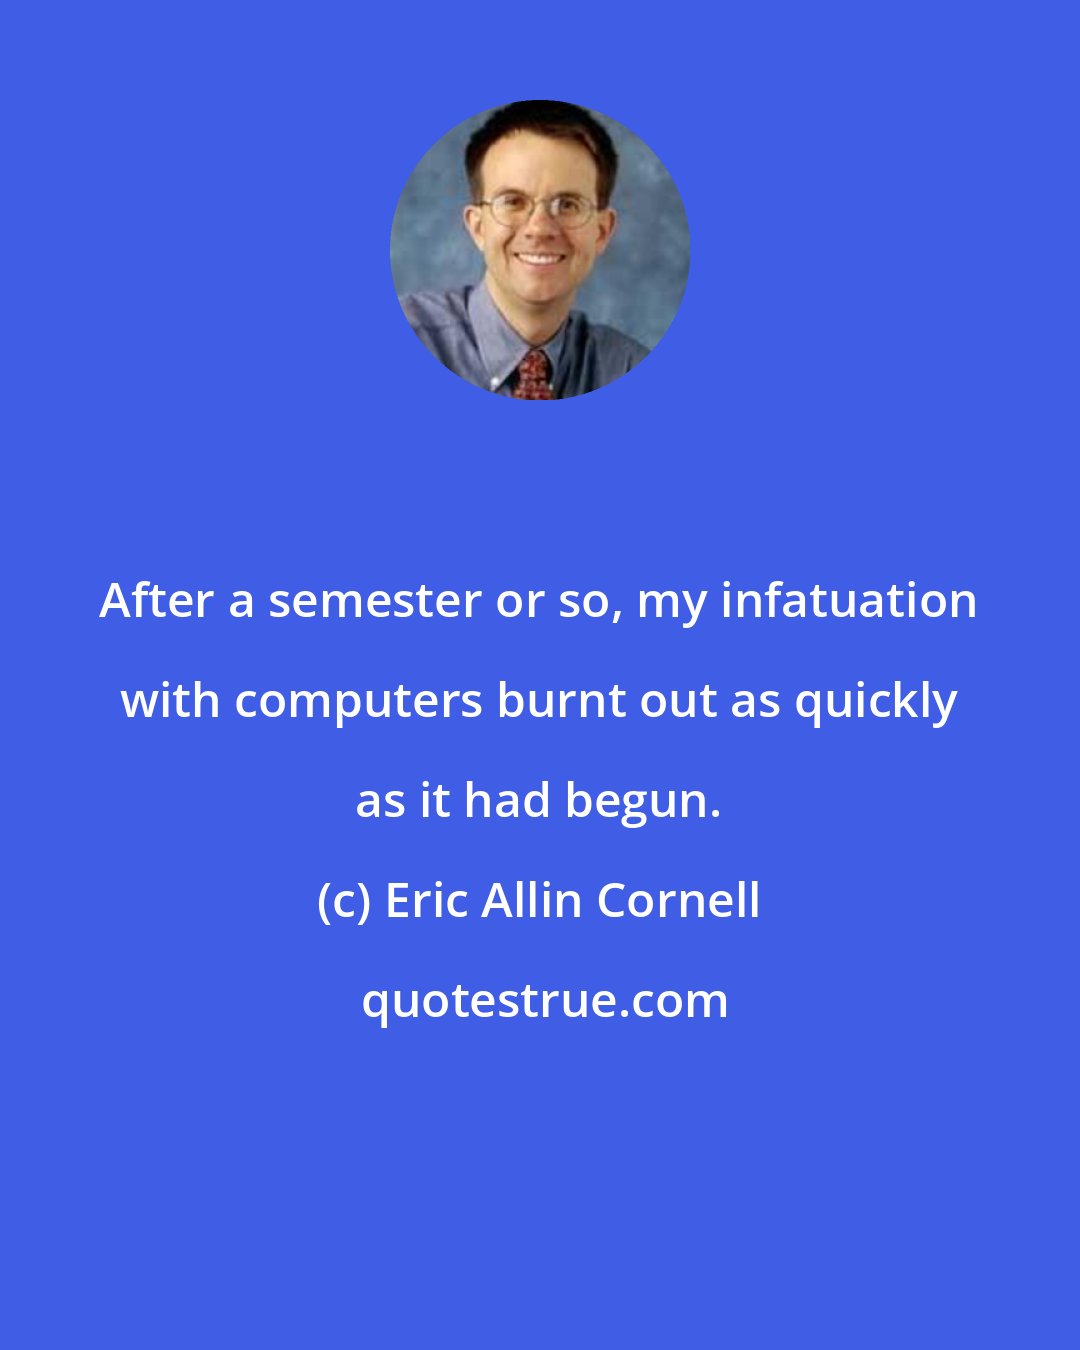 Eric Allin Cornell: After a semester or so, my infatuation with computers burnt out as quickly as it had begun.